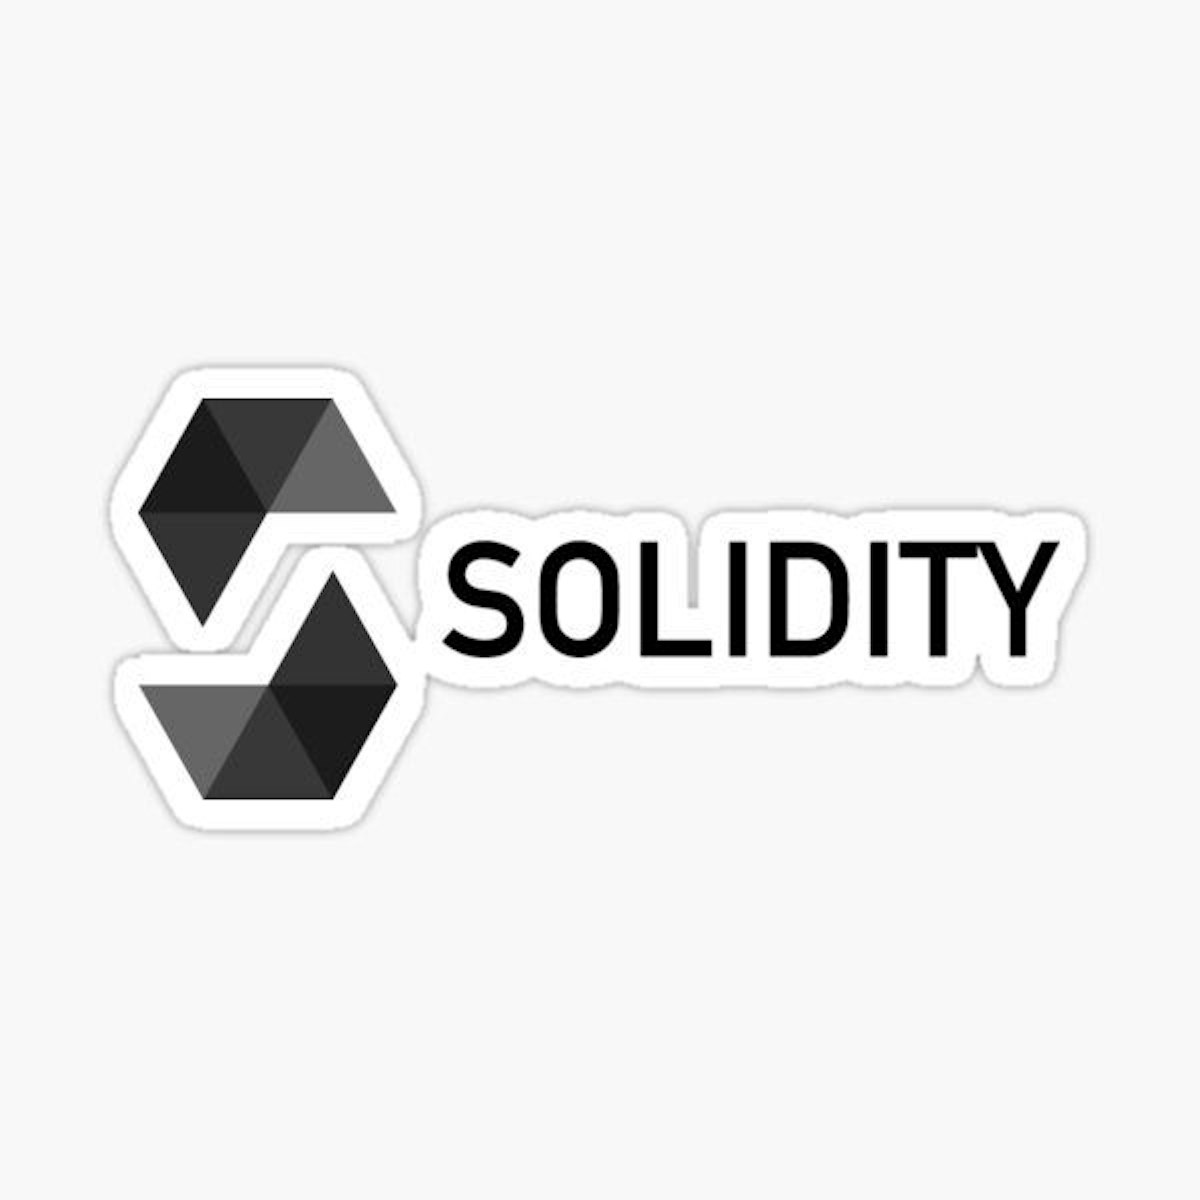 featured image - How to Solve "Struct Containing a (Nested) Mapping Cannot be Constructed" in Solidity